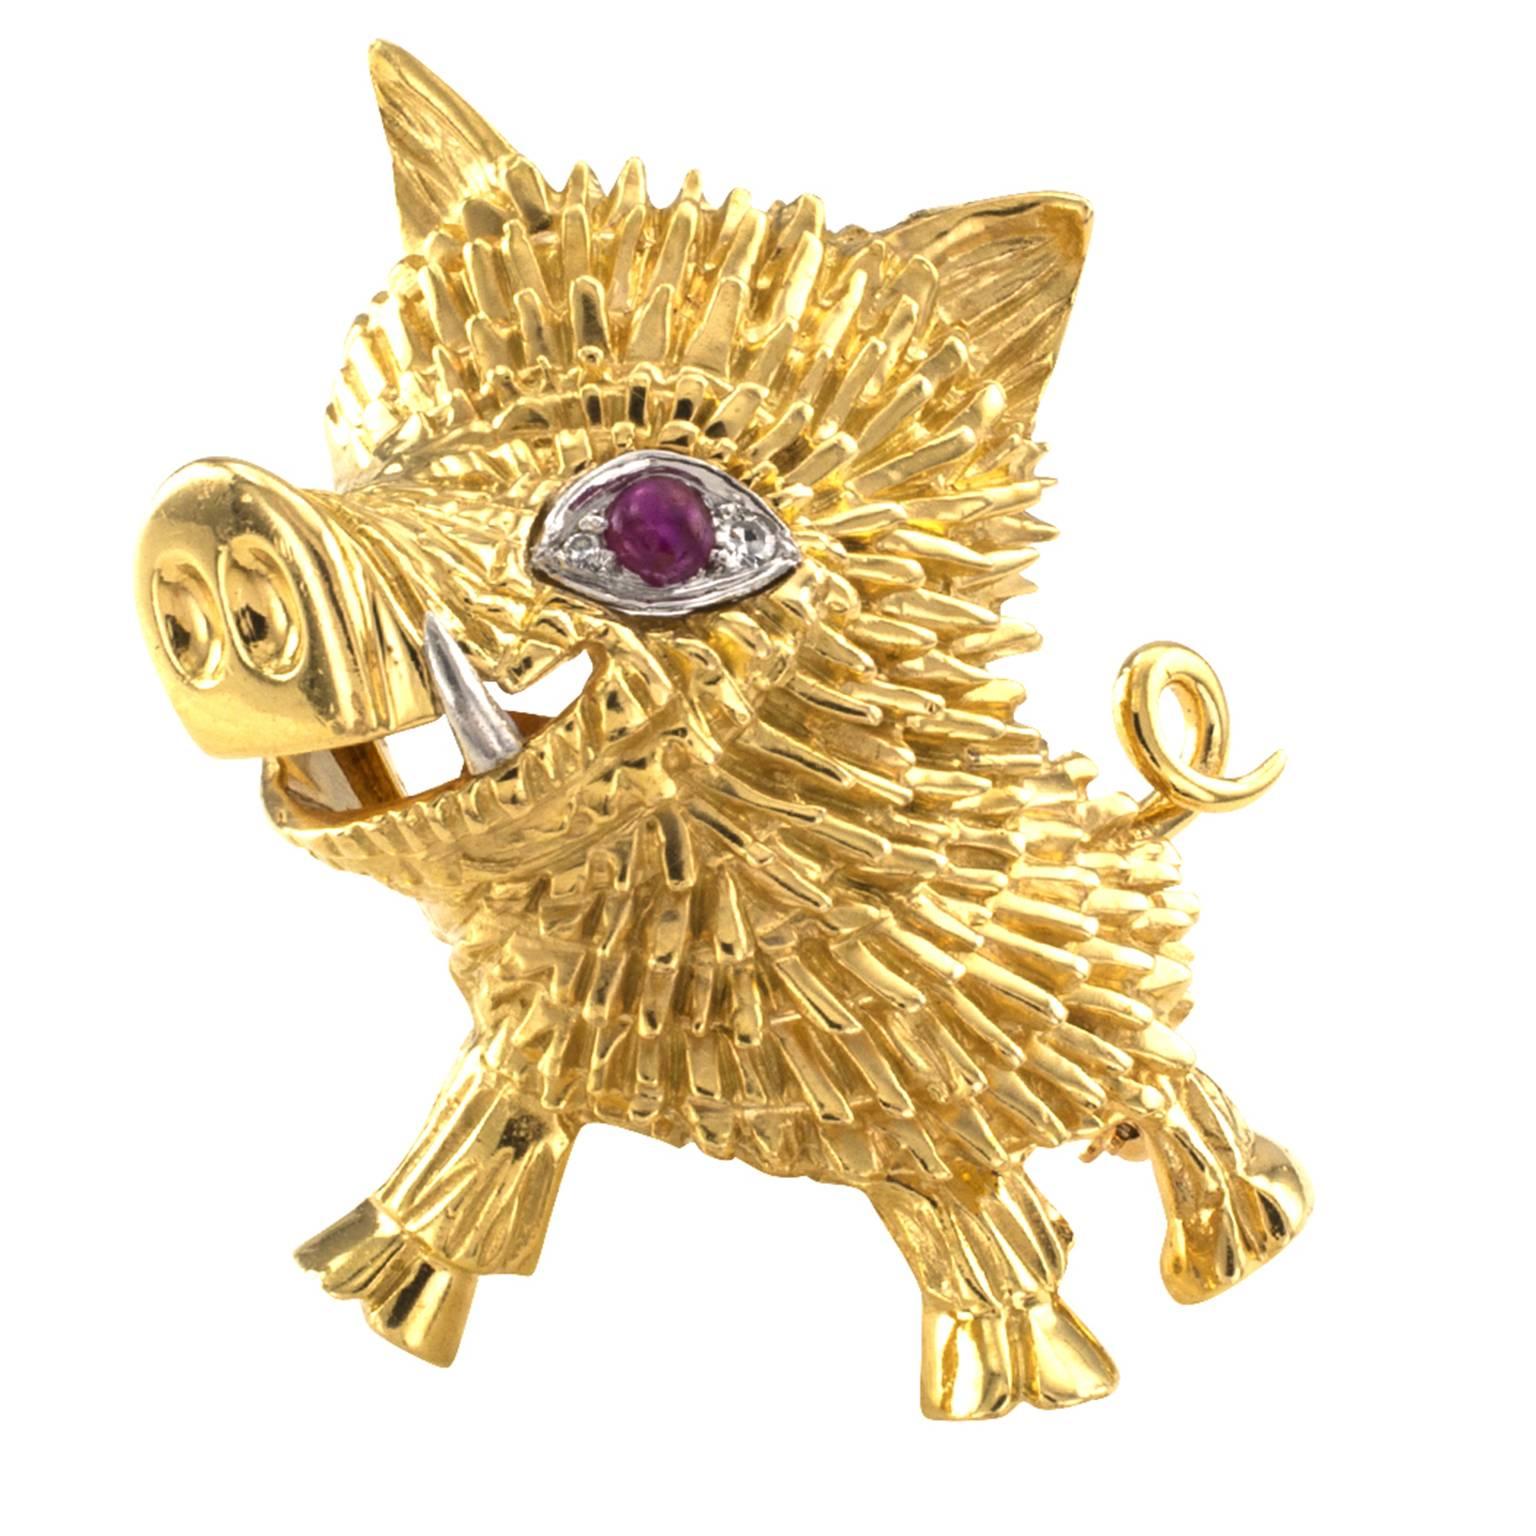 Hammerman Brothers Estate Wild Boar Gold Brooch

Isn't this the cutest?  A smiling wild boar!   Hammerman Brother's 18 karat yellow gold wild boar sports a platinum tusk and  an eye, the latter set with a ruby and a pair of diamonds.  Signed HB